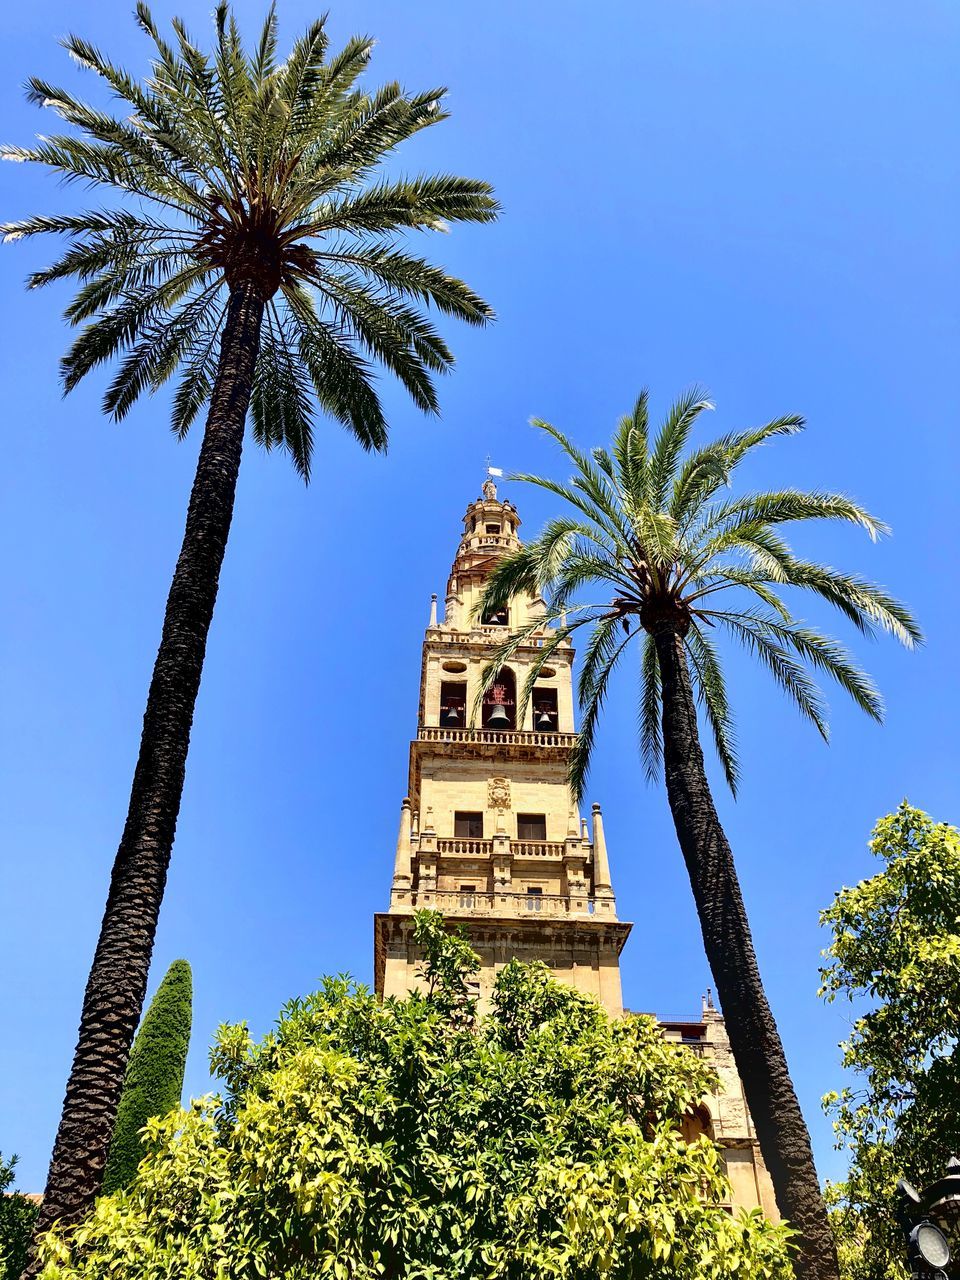 tree, sky, plant, palm tree, built structure, tropical climate, architecture, low angle view, building exterior, nature, growth, tall - high, history, the past, clear sky, day, travel destinations, no people, place of worship, building, outdoors, coconut palm tree, spire